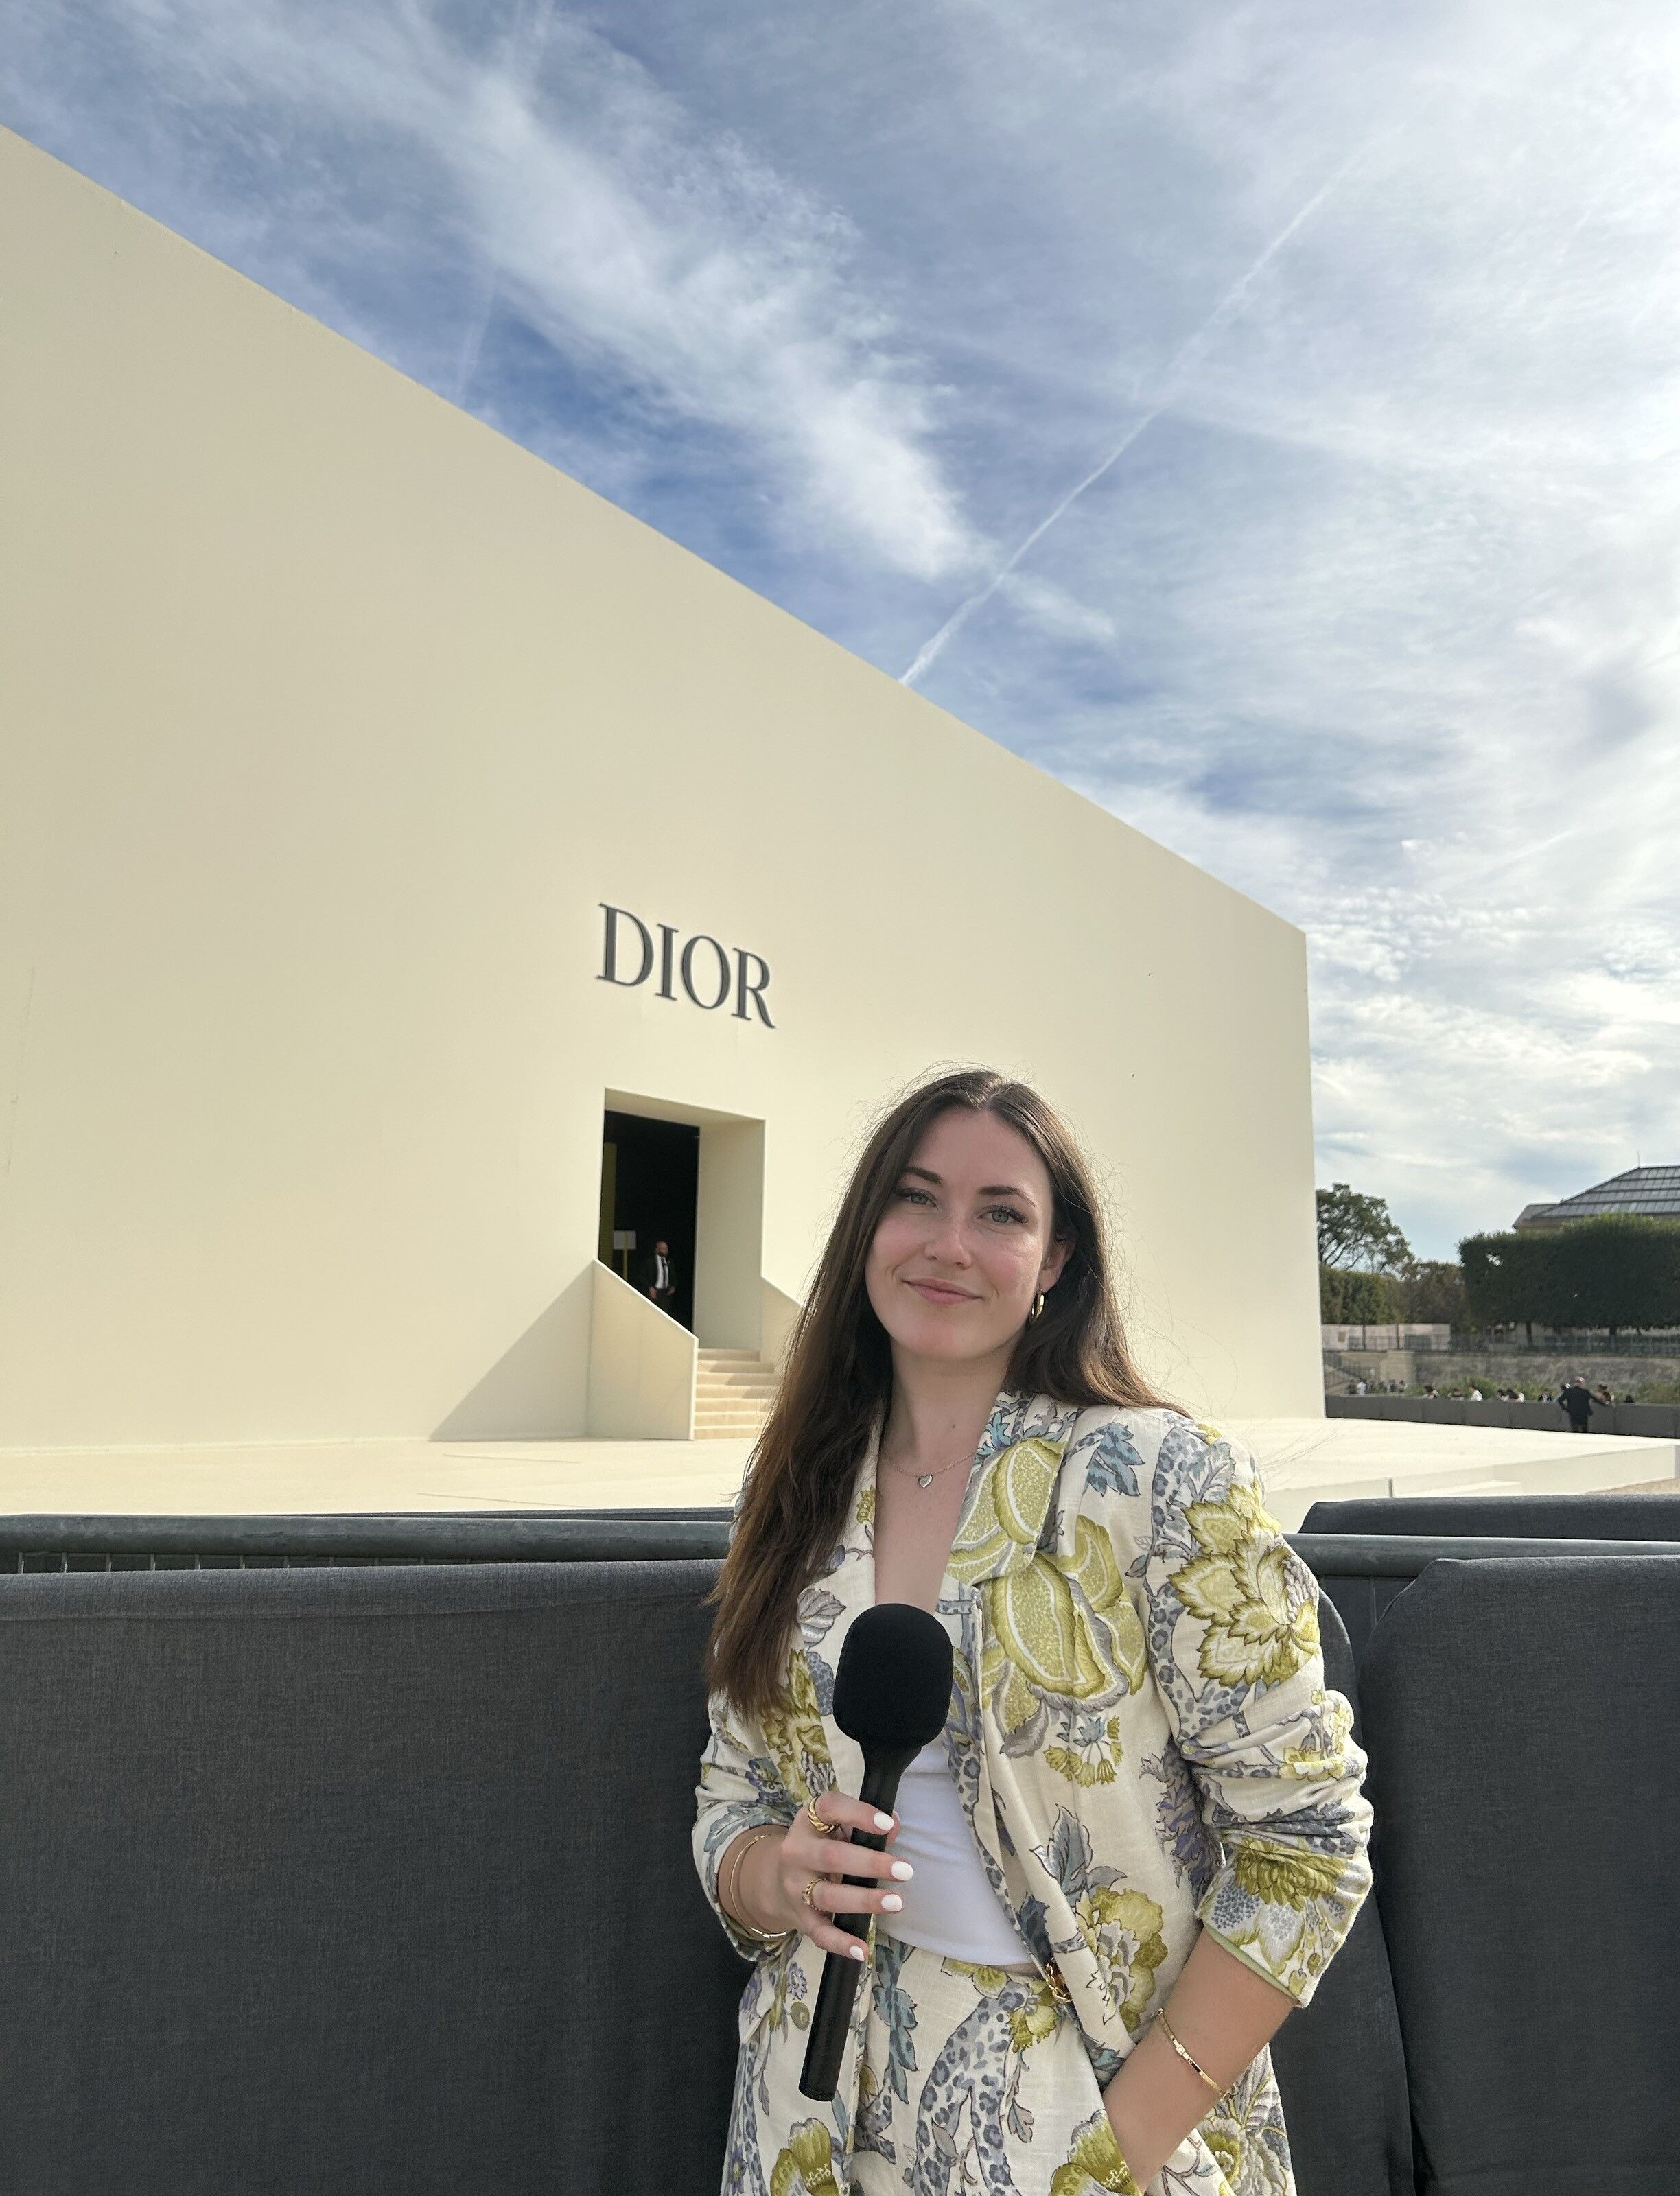 A reporter with a microphone stands before a Dior show venue, ready to broadcast.